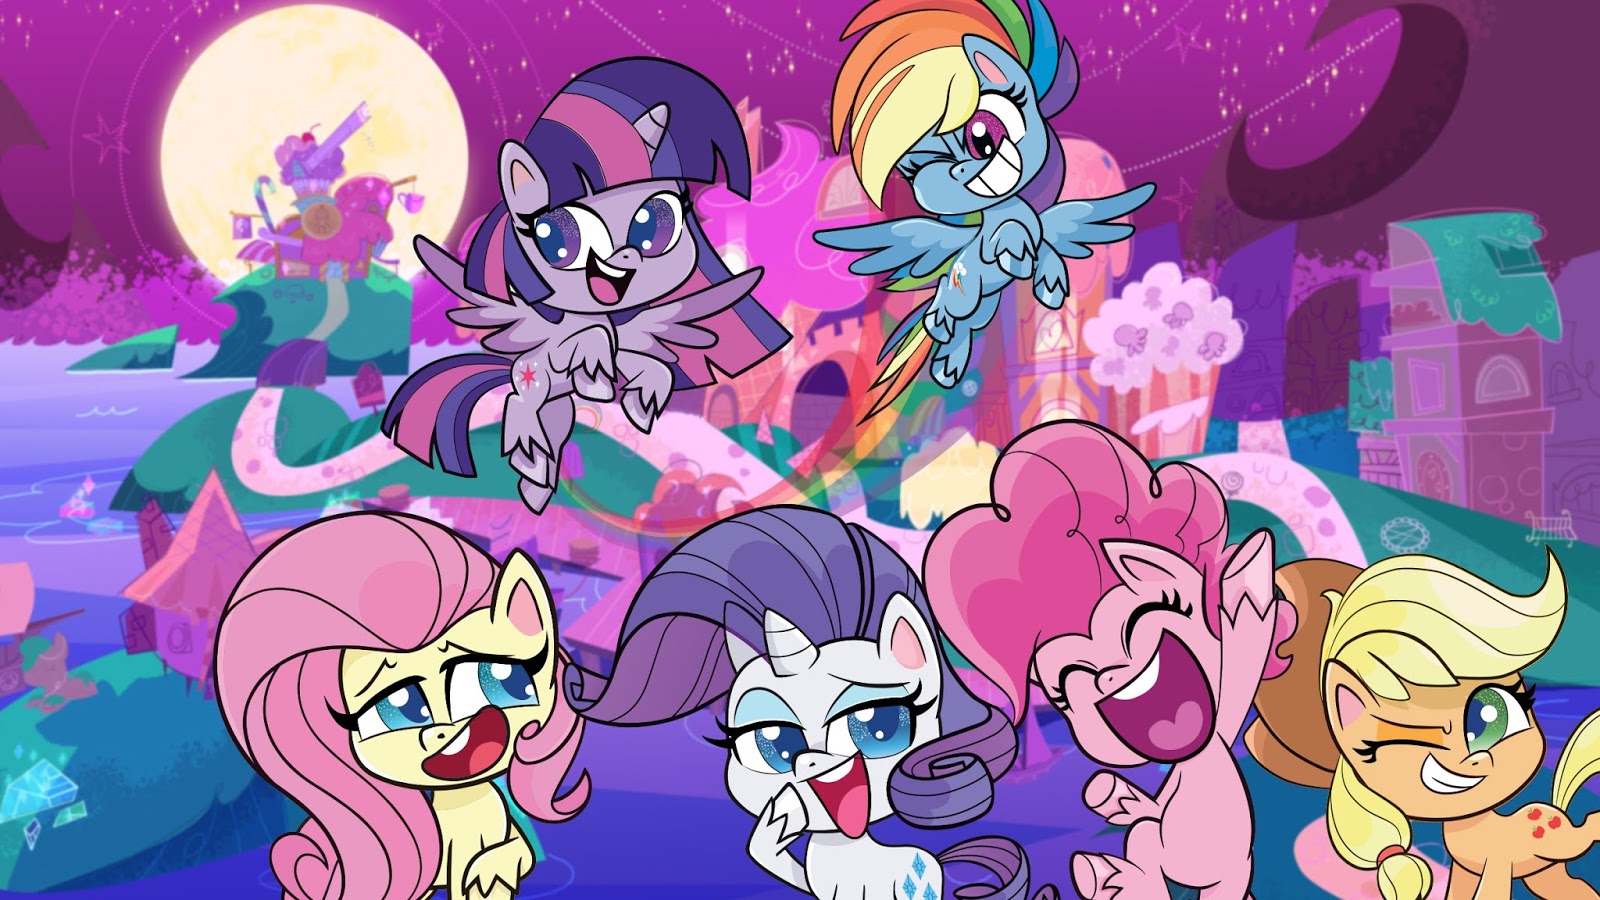 Pony Life- A new MLP show coming out in the year 2020. My Little Pony: Friendship is Magic